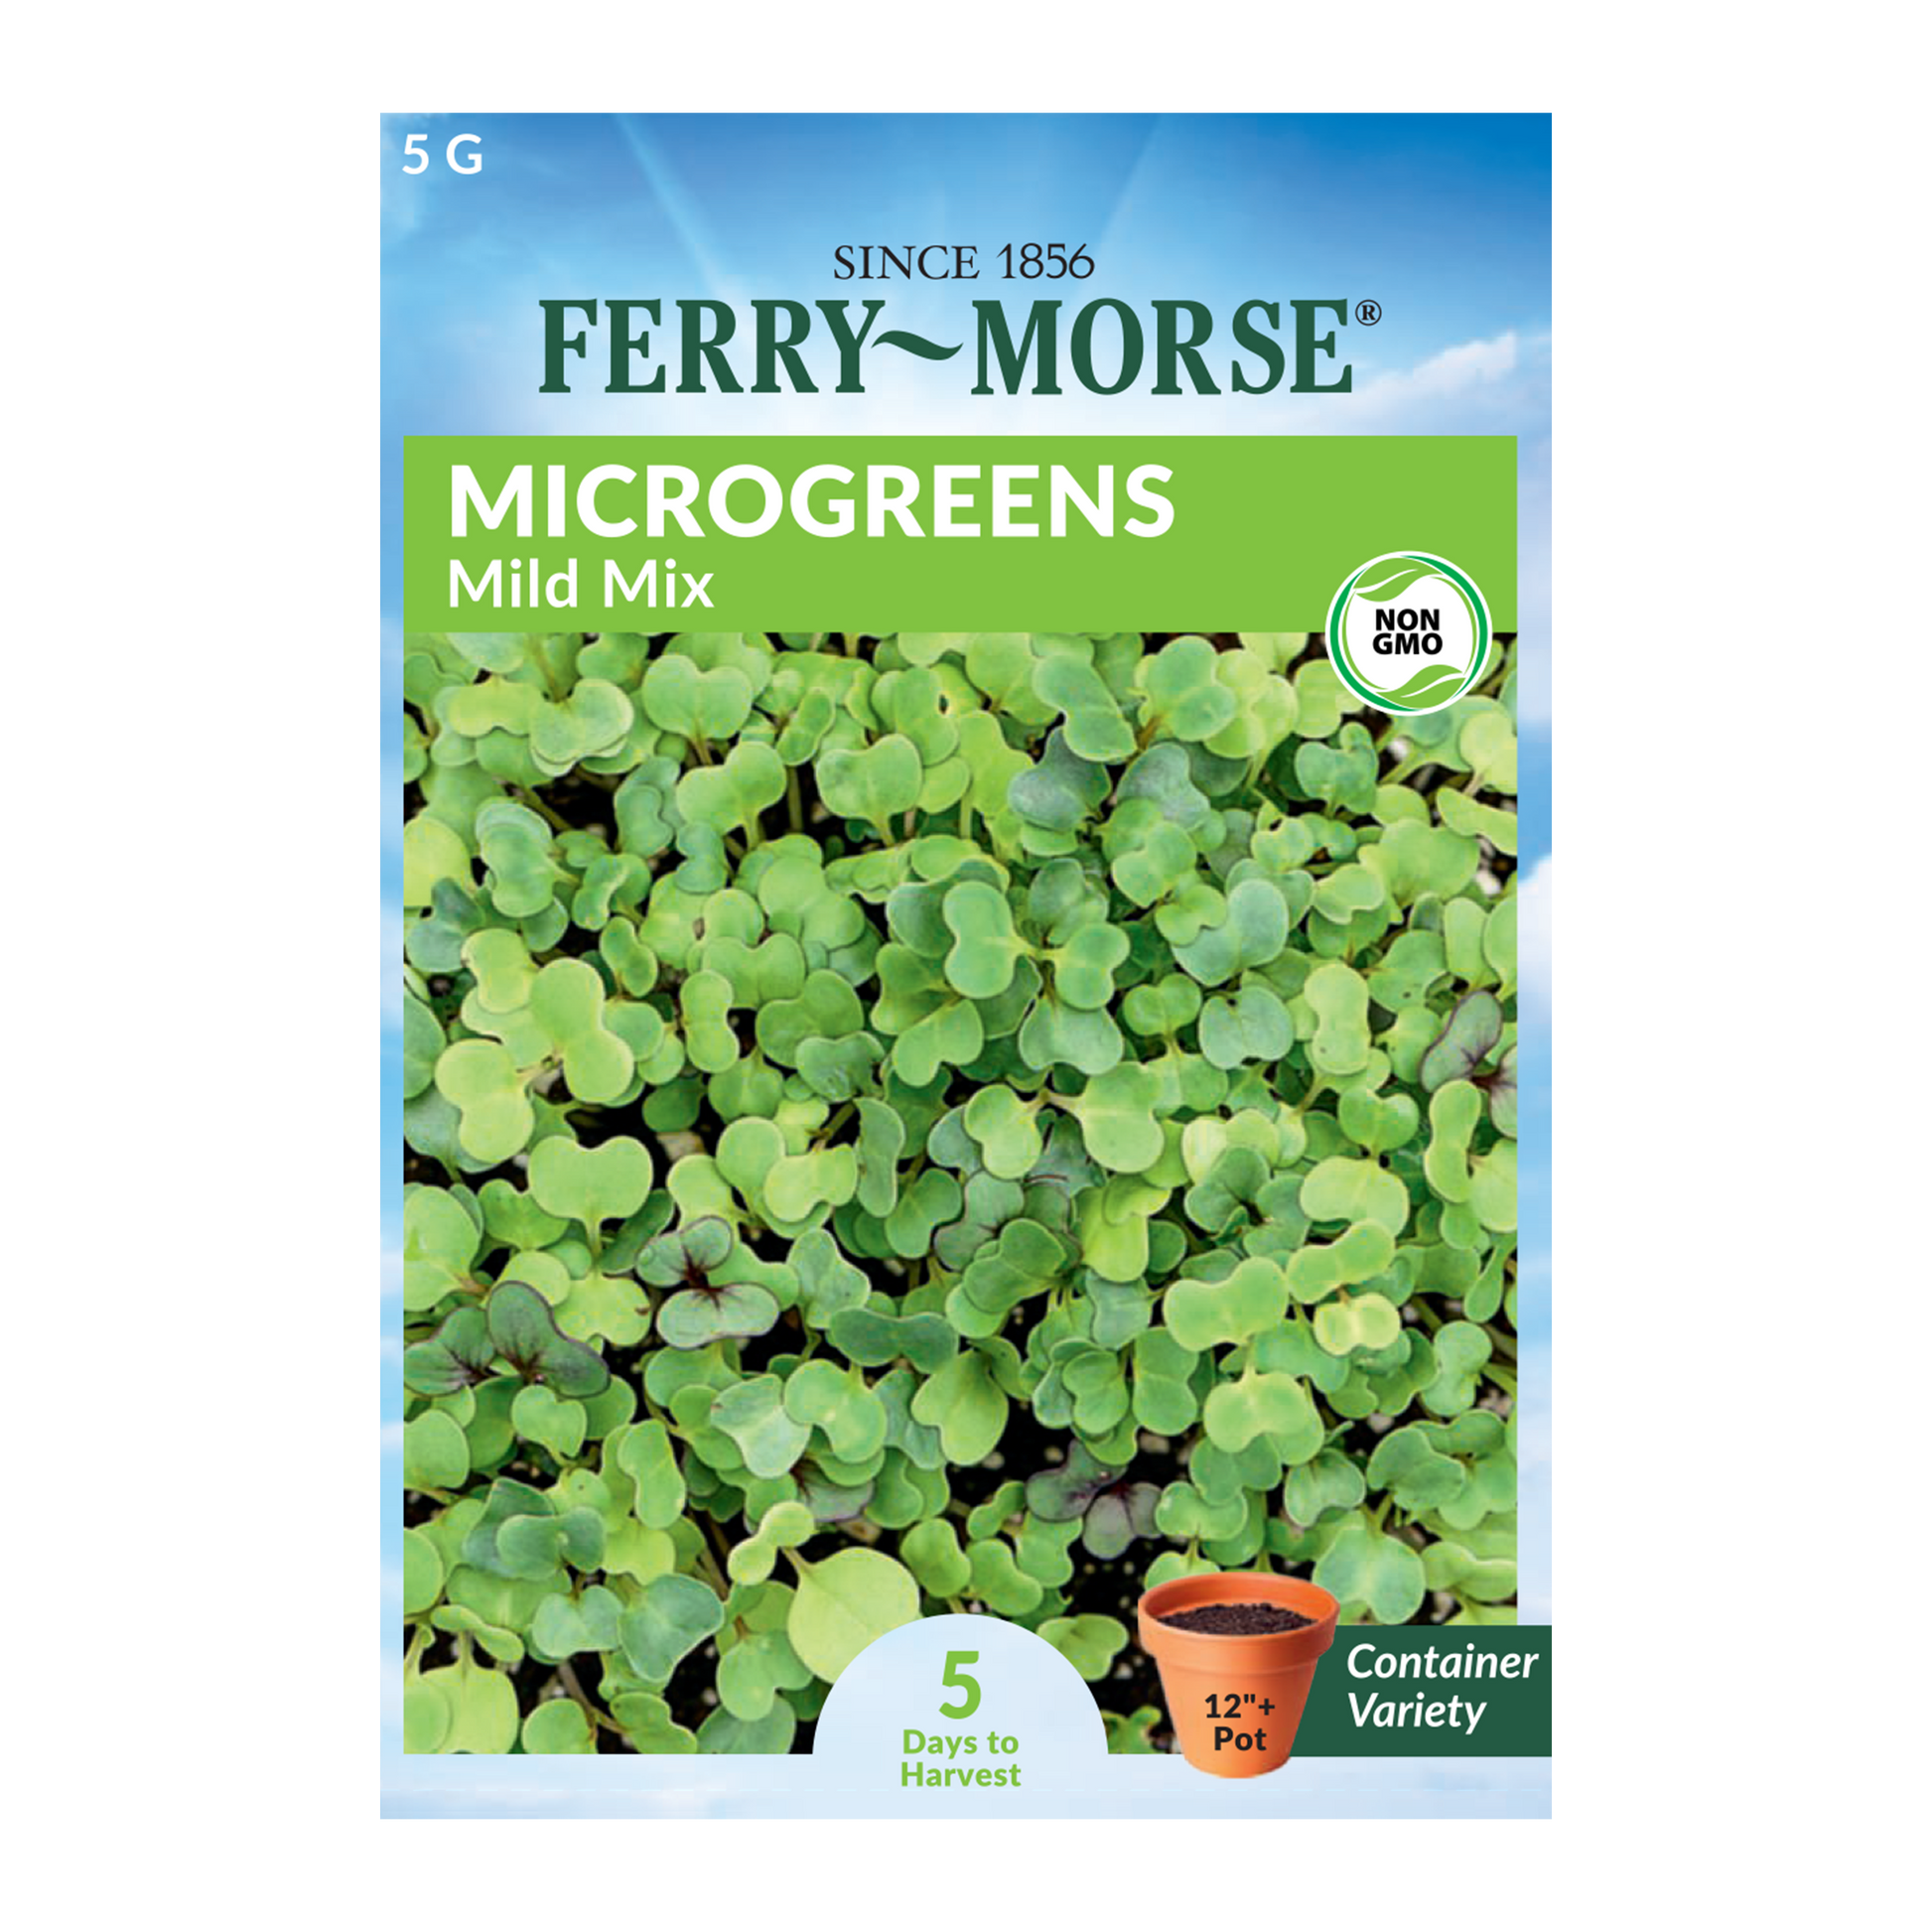 Mild Mix Microgreen Seeds packet_Microgreens seeds from Ferry Morse